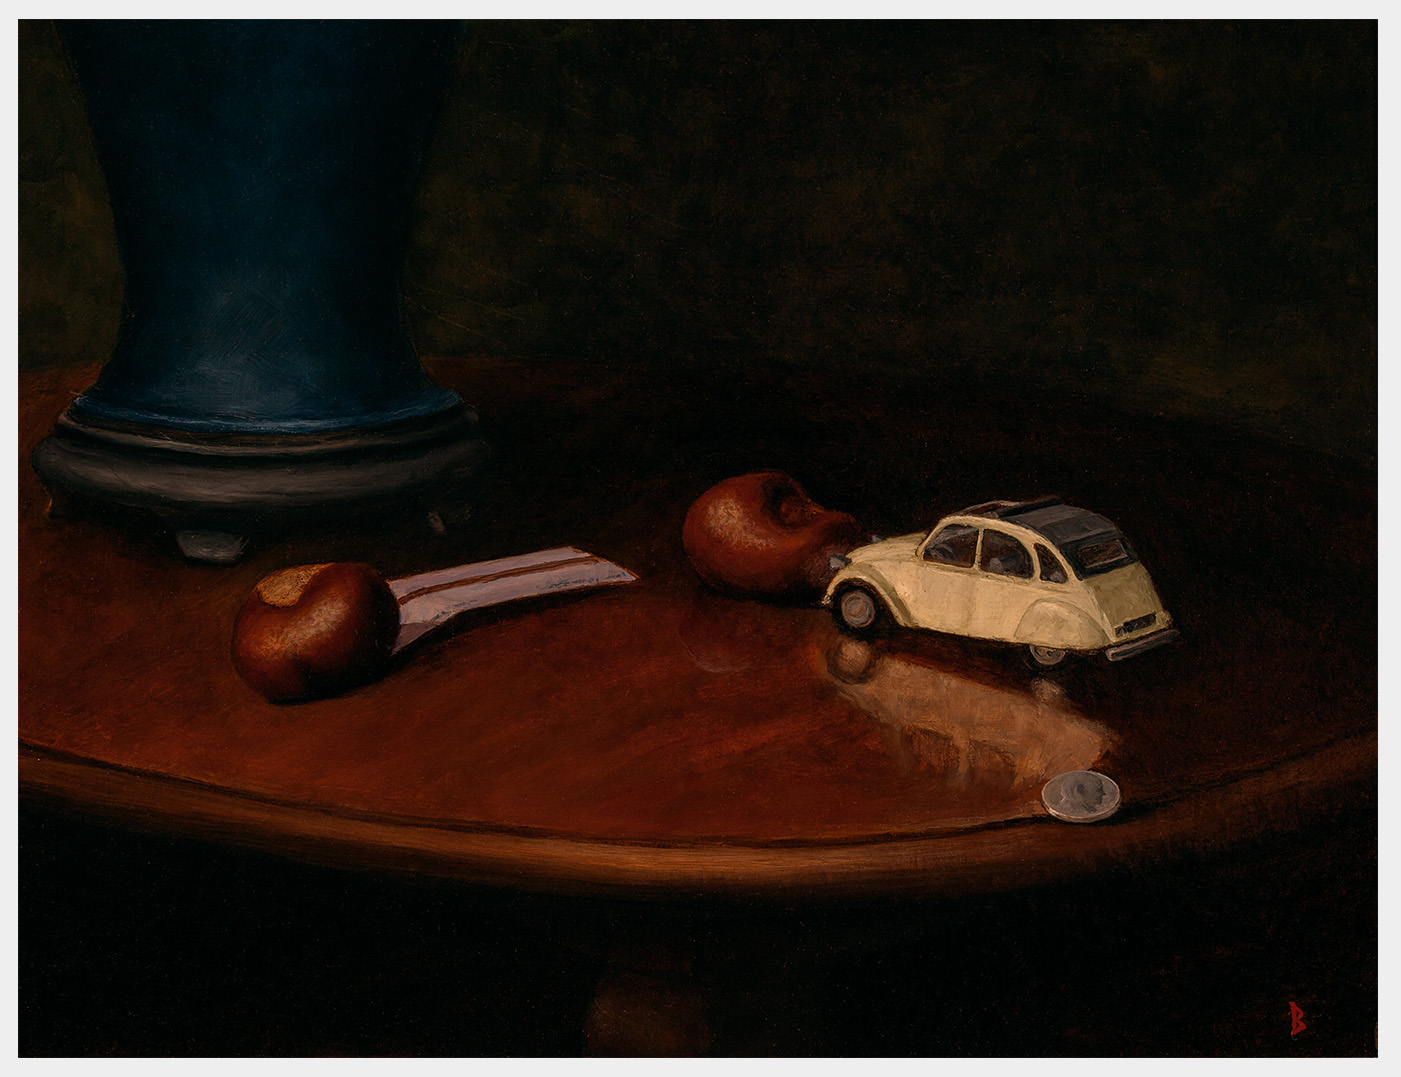 Realistic oil painting of the contents of a boy’s pocket including a bus ticket two chestnuts and a white toy car and a coin on a gleaming wooden table top with the base of a blue lamp just visible in the background